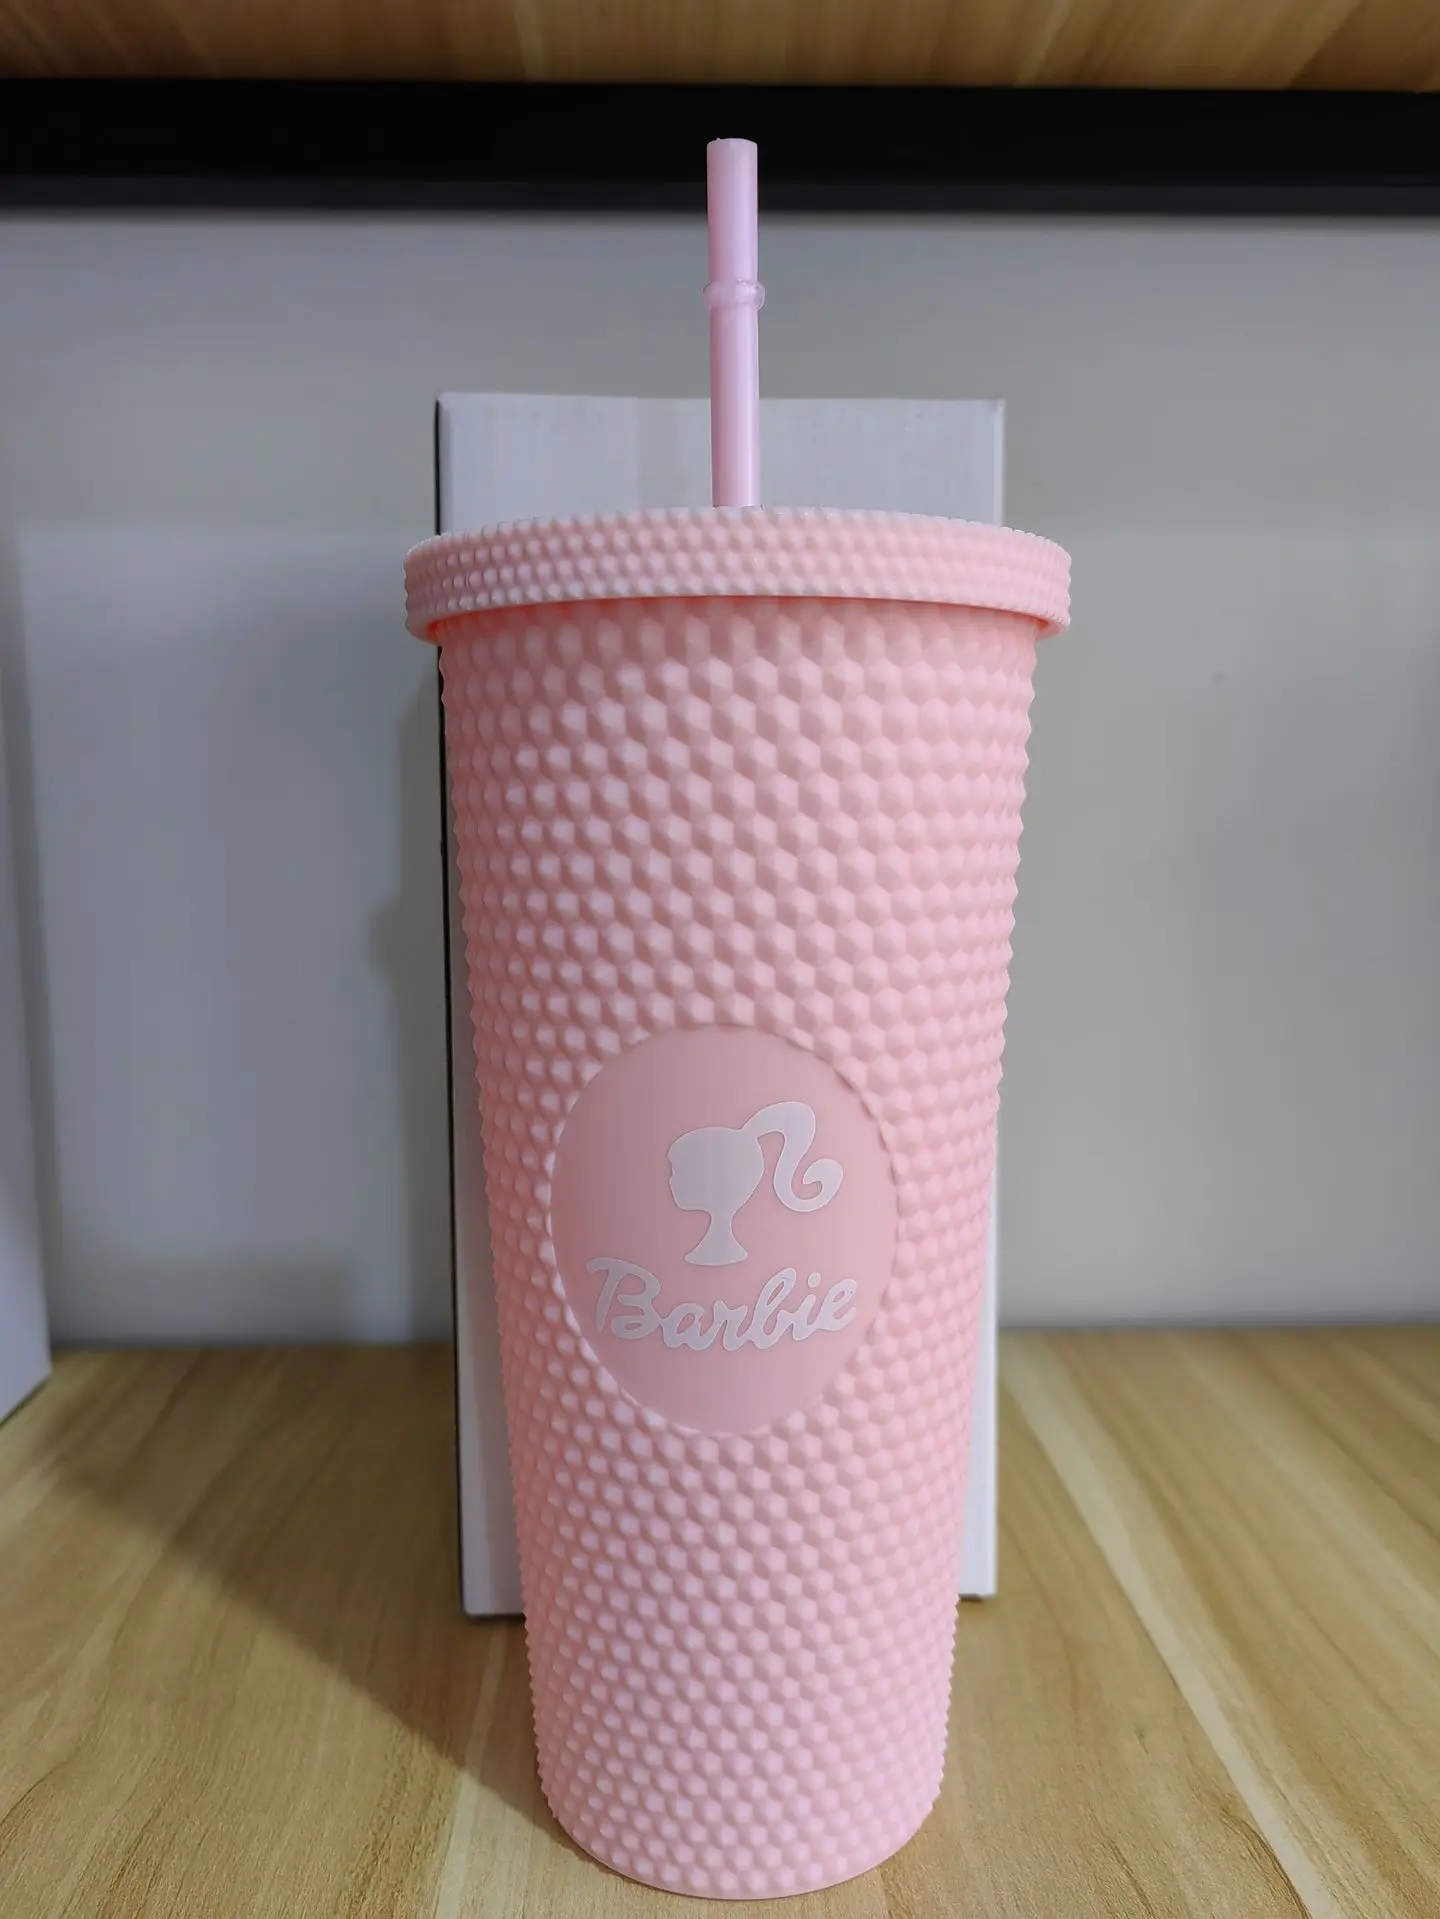 https://ae01.alicdn.com/kf/S3bcfc0b1dc4048109a22f7a28d1c329bL/2023-New-Miniso-Barbie-Powder-800Ml-High-Capacity-Double-Layer-Checkered-Plastic-Accompanying-Straw-Water-Cup.jpg